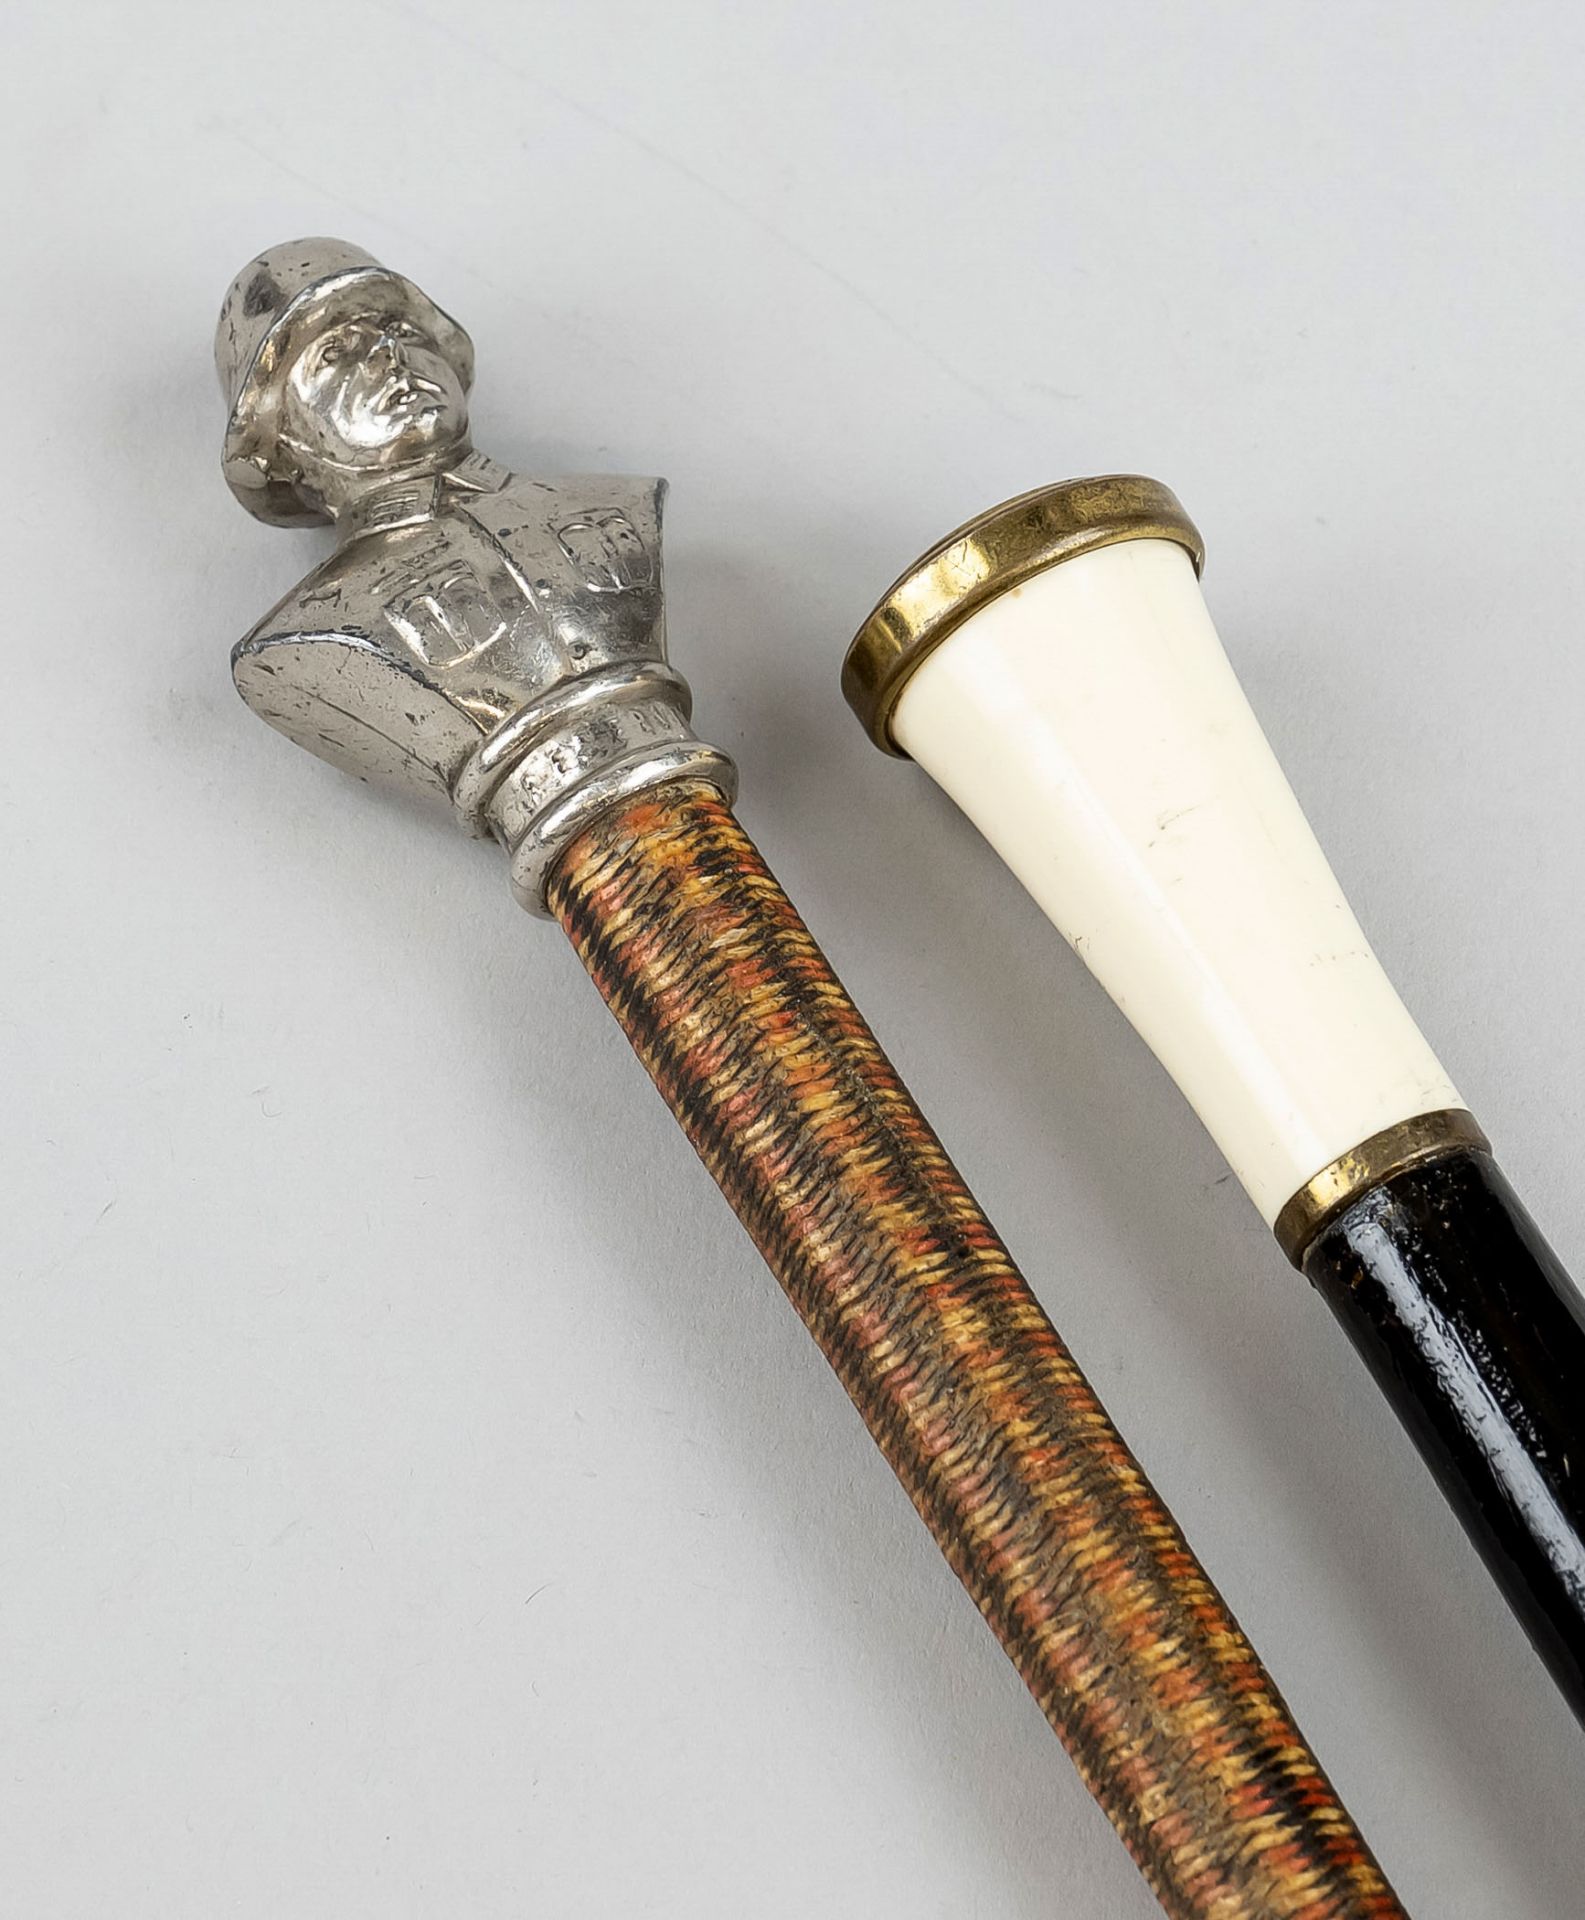 Reservist cane and riding crop, end of 19th c. Black lacquered wooden cane with brass cuff and